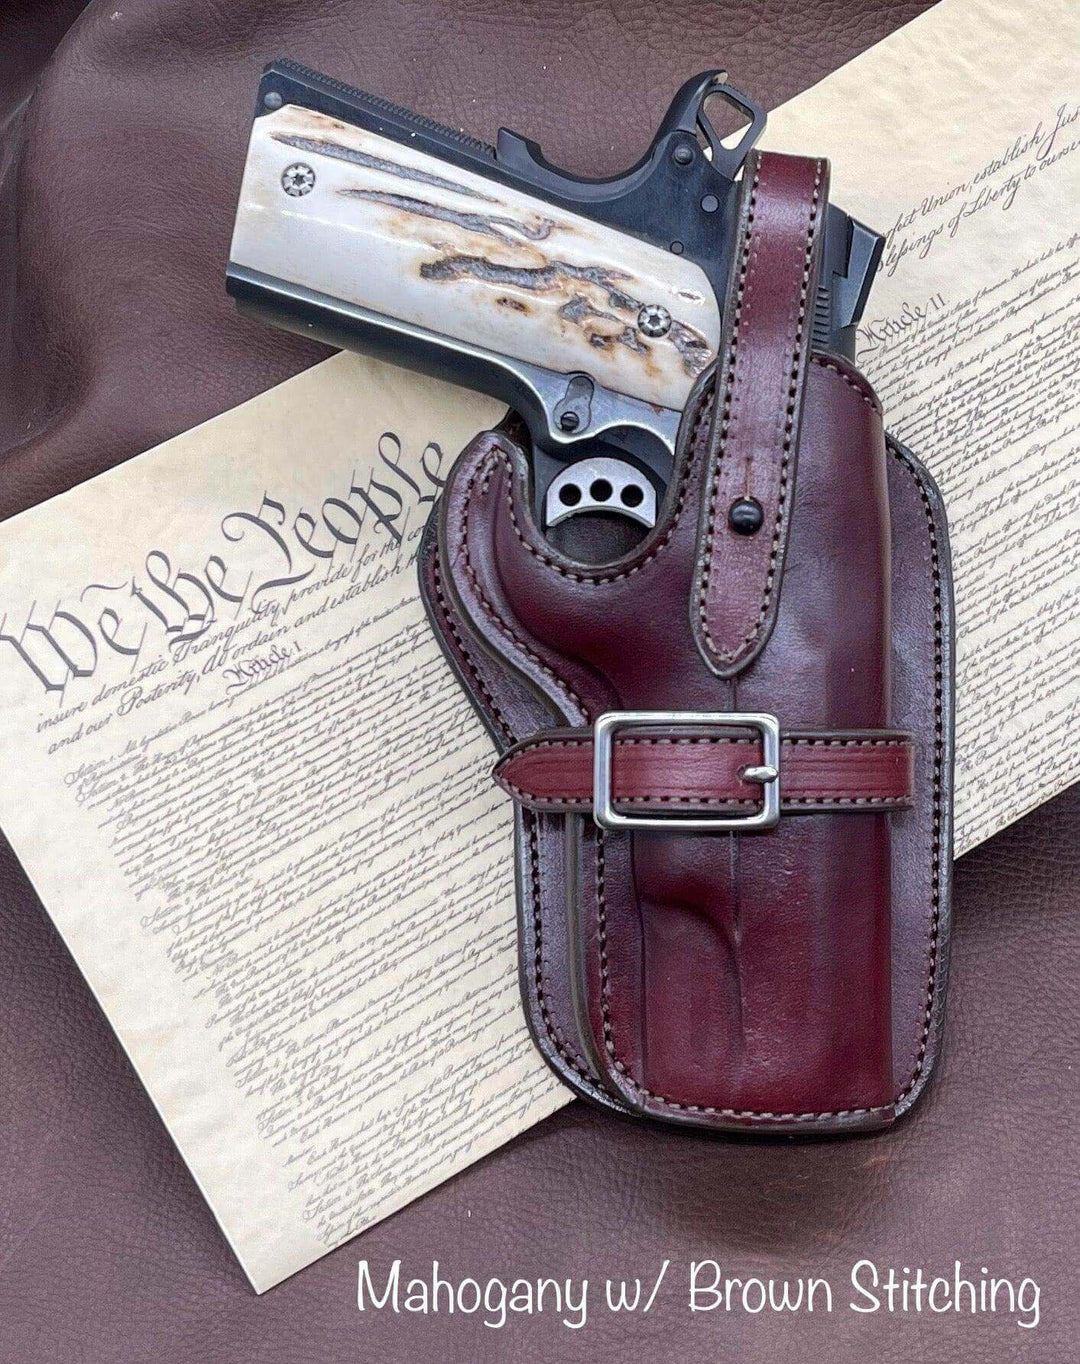 *Made to Order* LH/RH High Noon Cross Draw Western Holster 1911 5” Plain-Busted B Leather